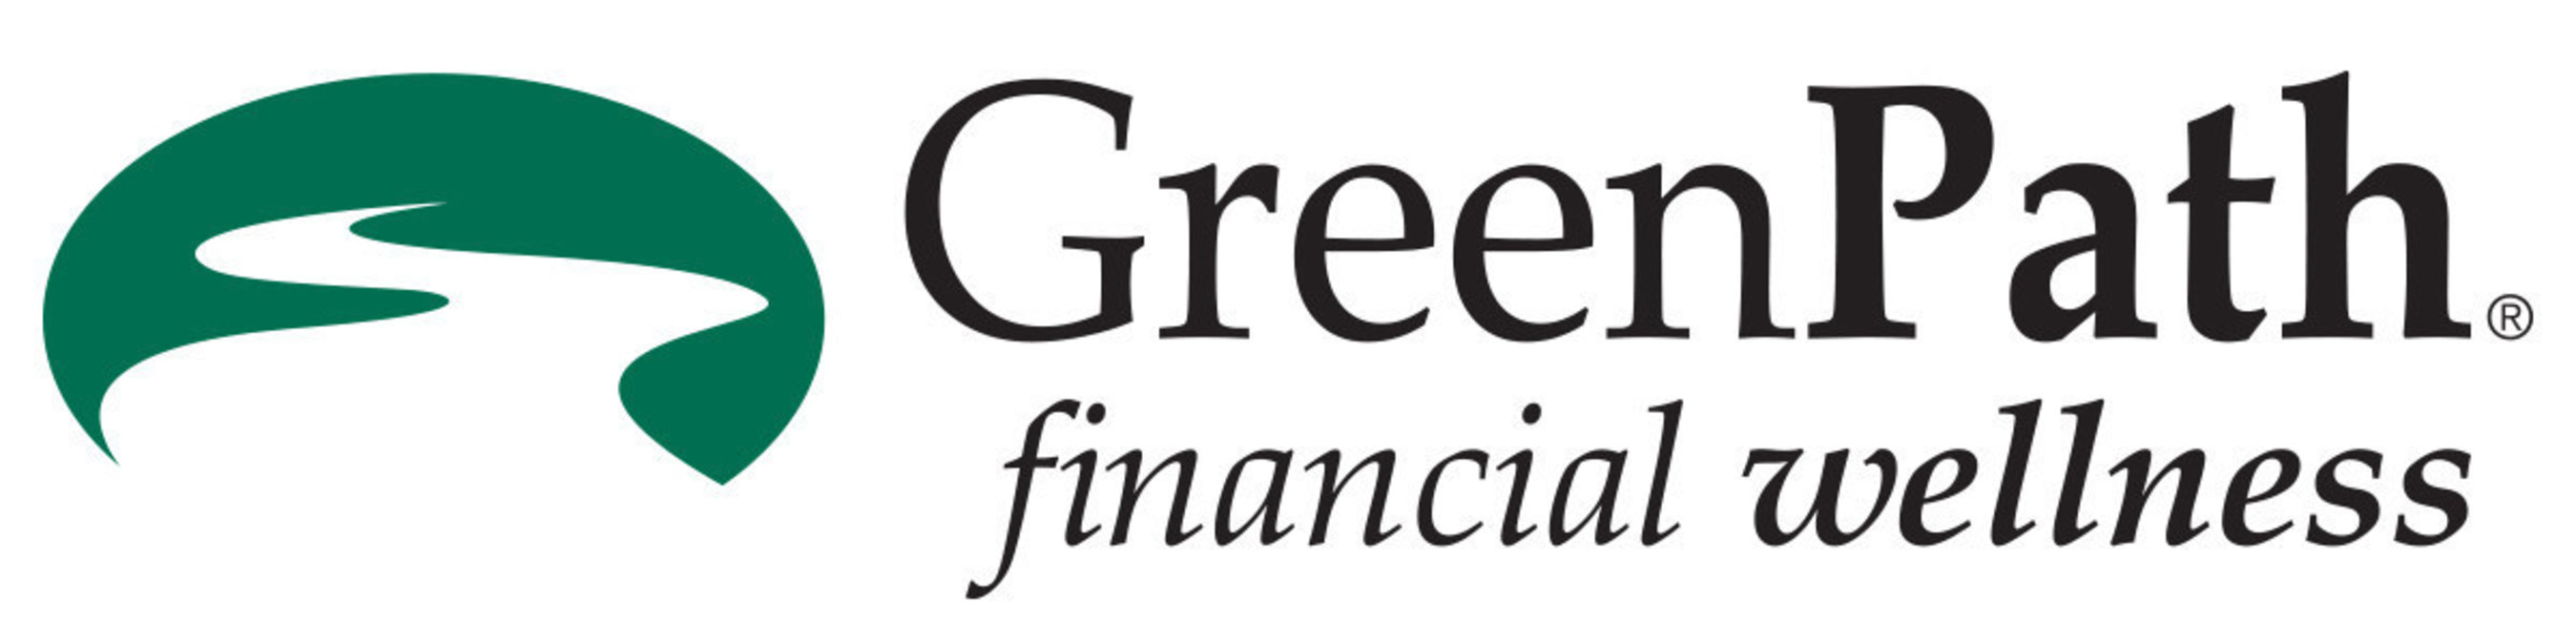 GreenPath Financial Wellness is a nationwide, non-profit financial organization that assists consumers with credit card debt, housing debt, student loan debt, and bankruptcy concerns. Our customized services and attainable solutions have been helping people achieve their financial goals since 1961. GreenPath operates more than 60 offices in 13 states. They also deliver licensed services throughout the United States over the Internet and telephone.